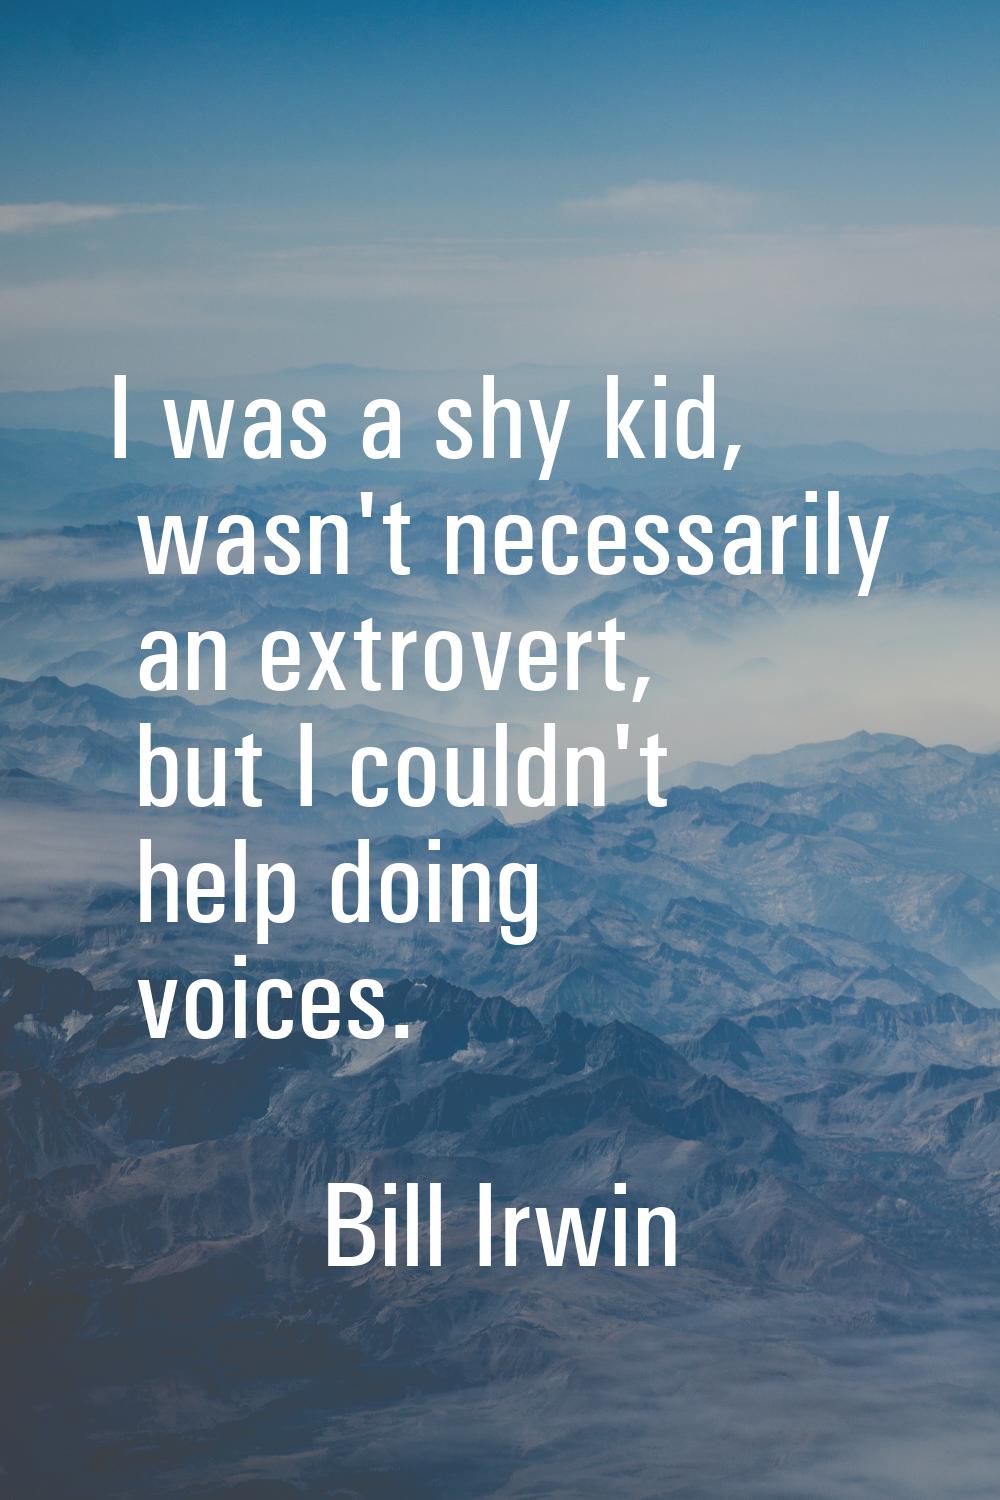 I was a shy kid, wasn't necessarily an extrovert, but I couldn't help doing voices.